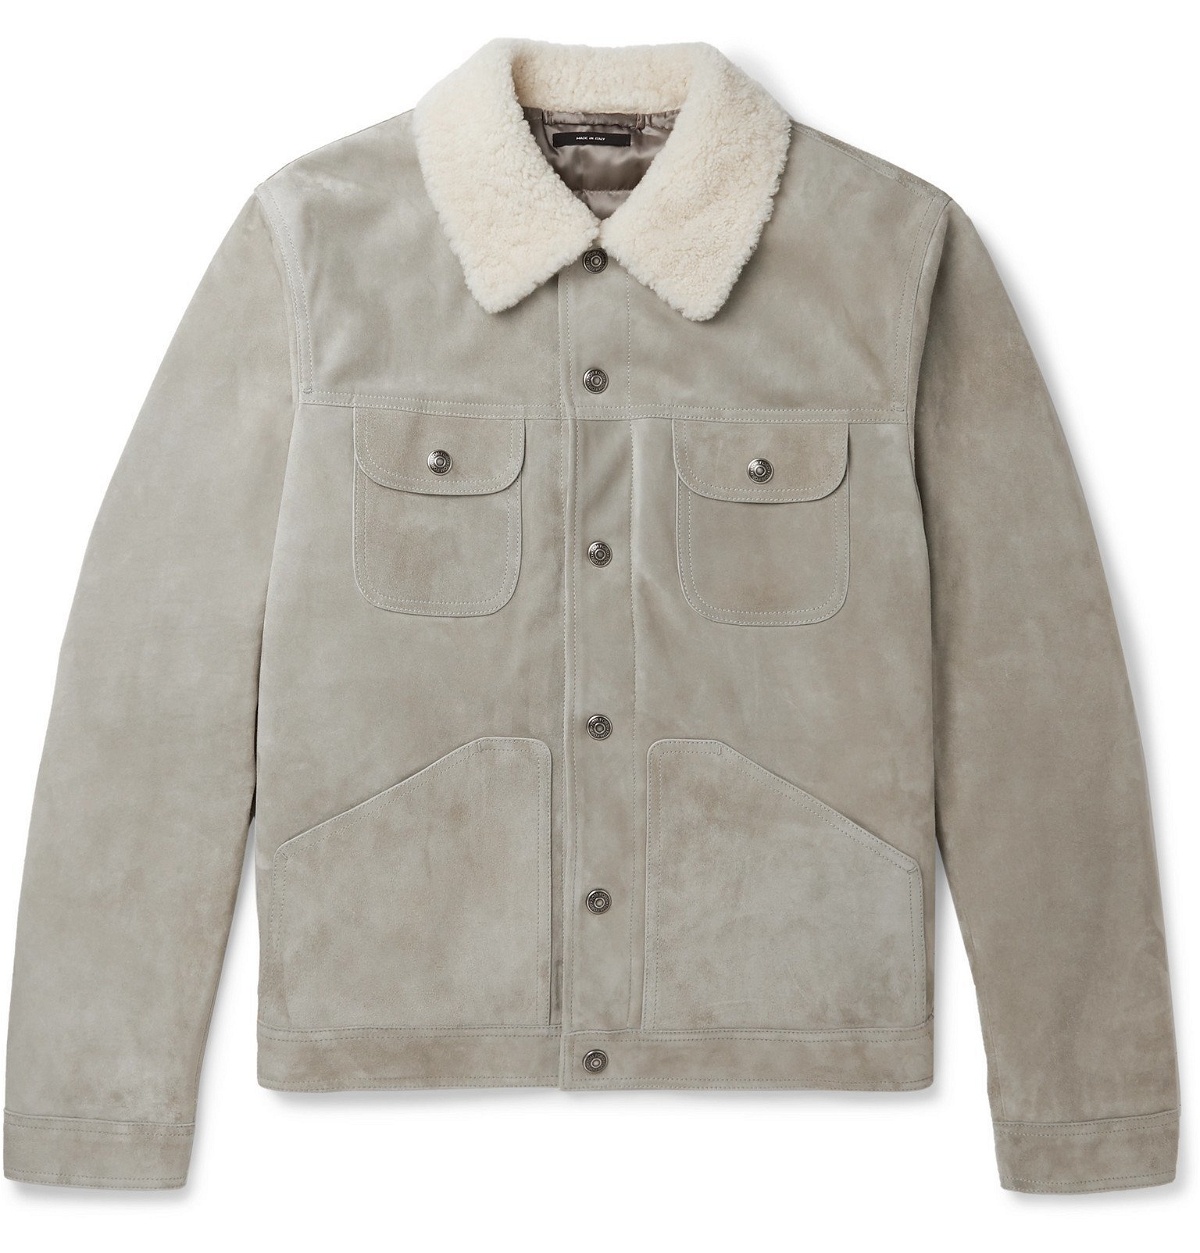 TOM FORD - Suede Jacket - Gray TOM FORD